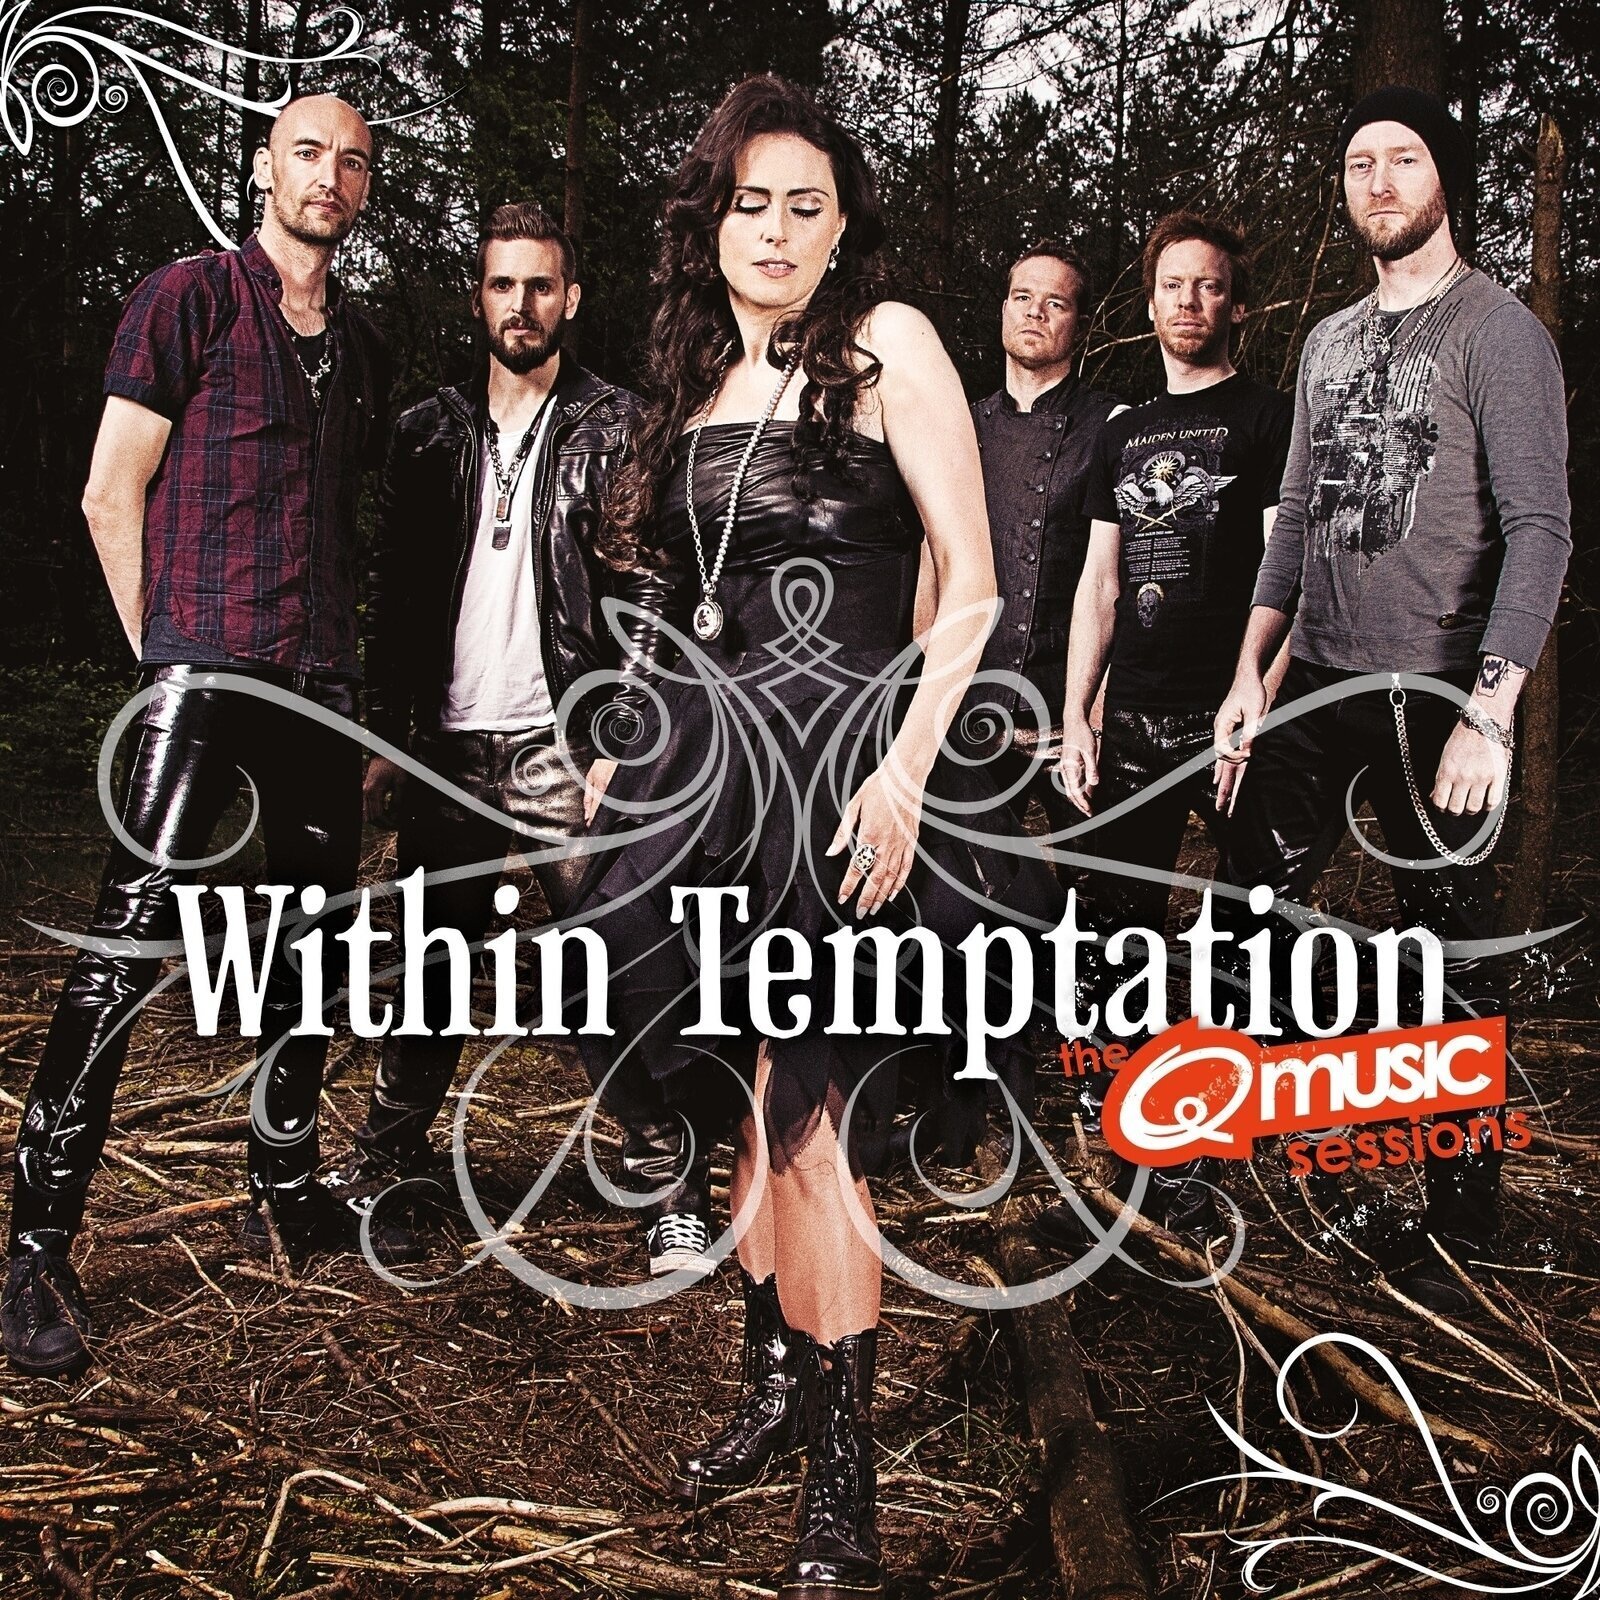 Glasbene CD Within Temptation - The Q-Music Sessions (Slipcase) (Limited Edition) (CD)